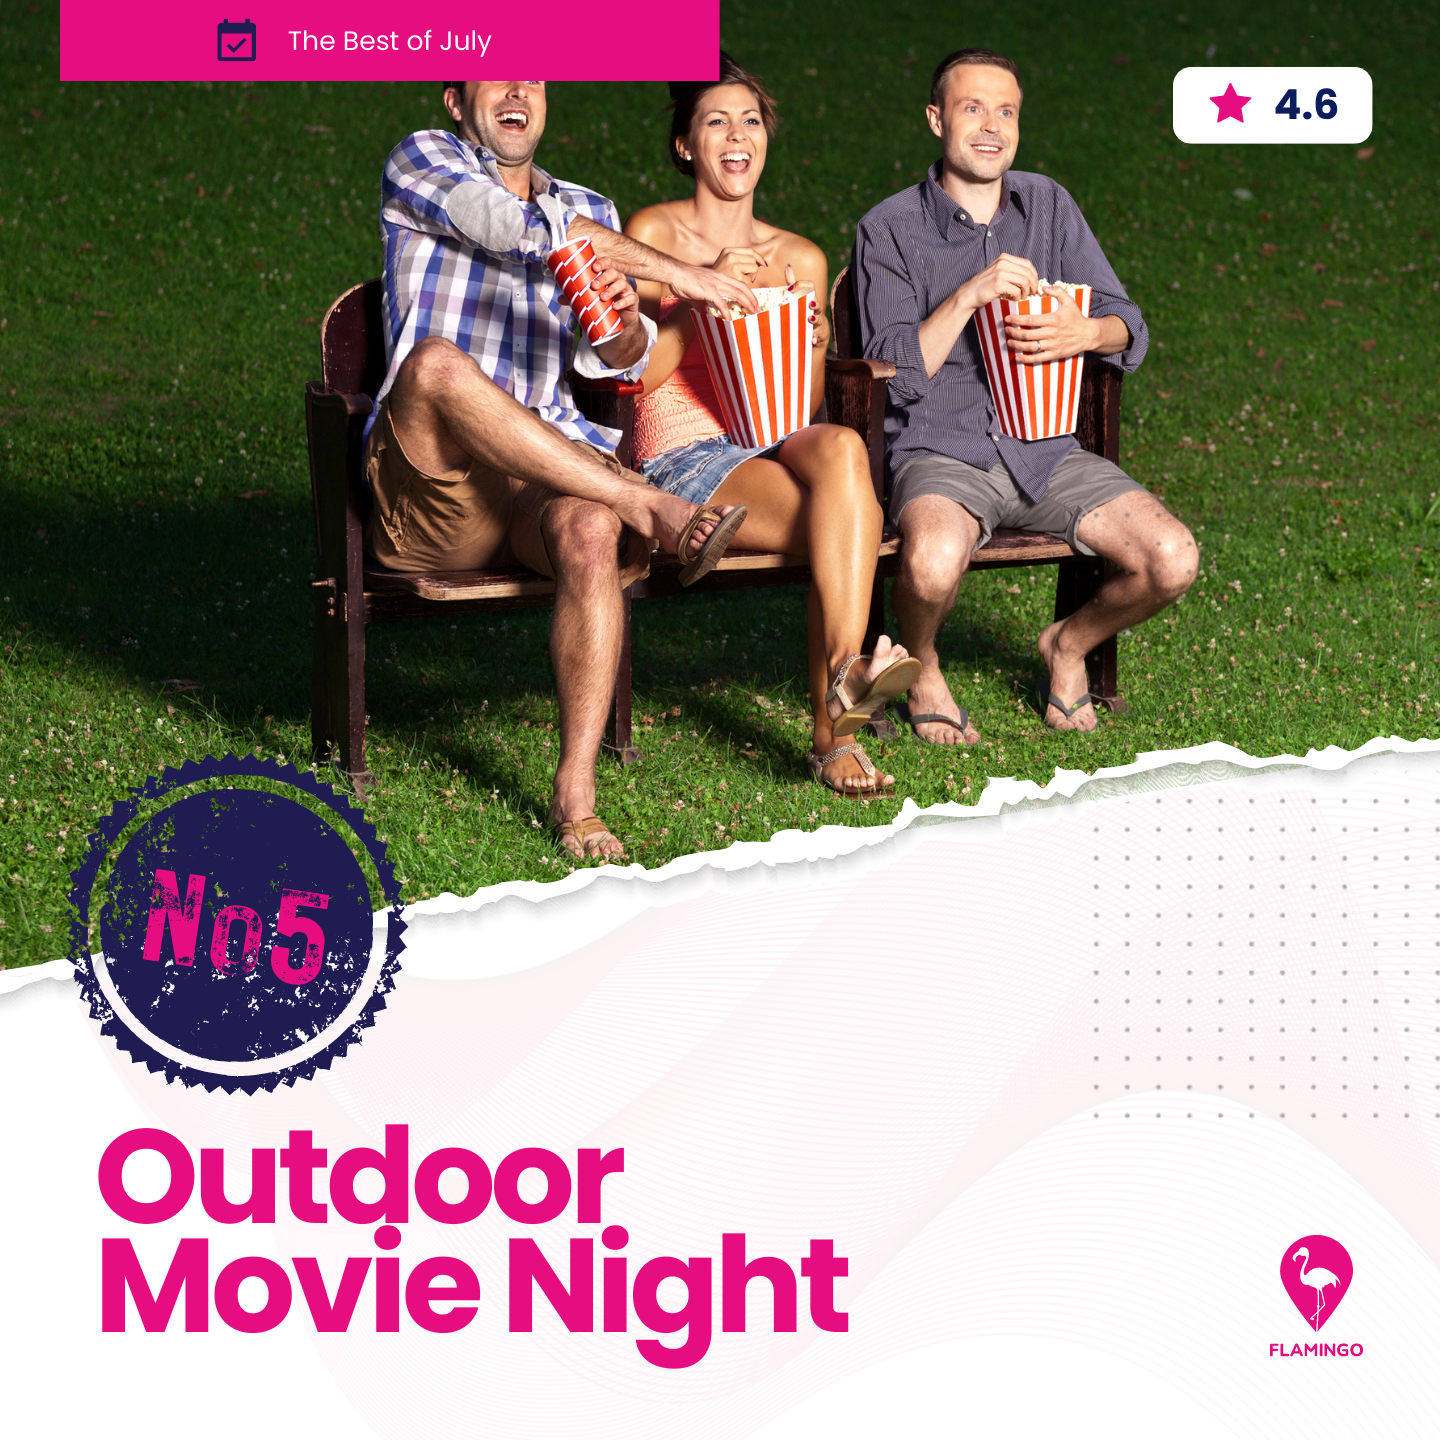 Outdoor Movie Night | resident events for july